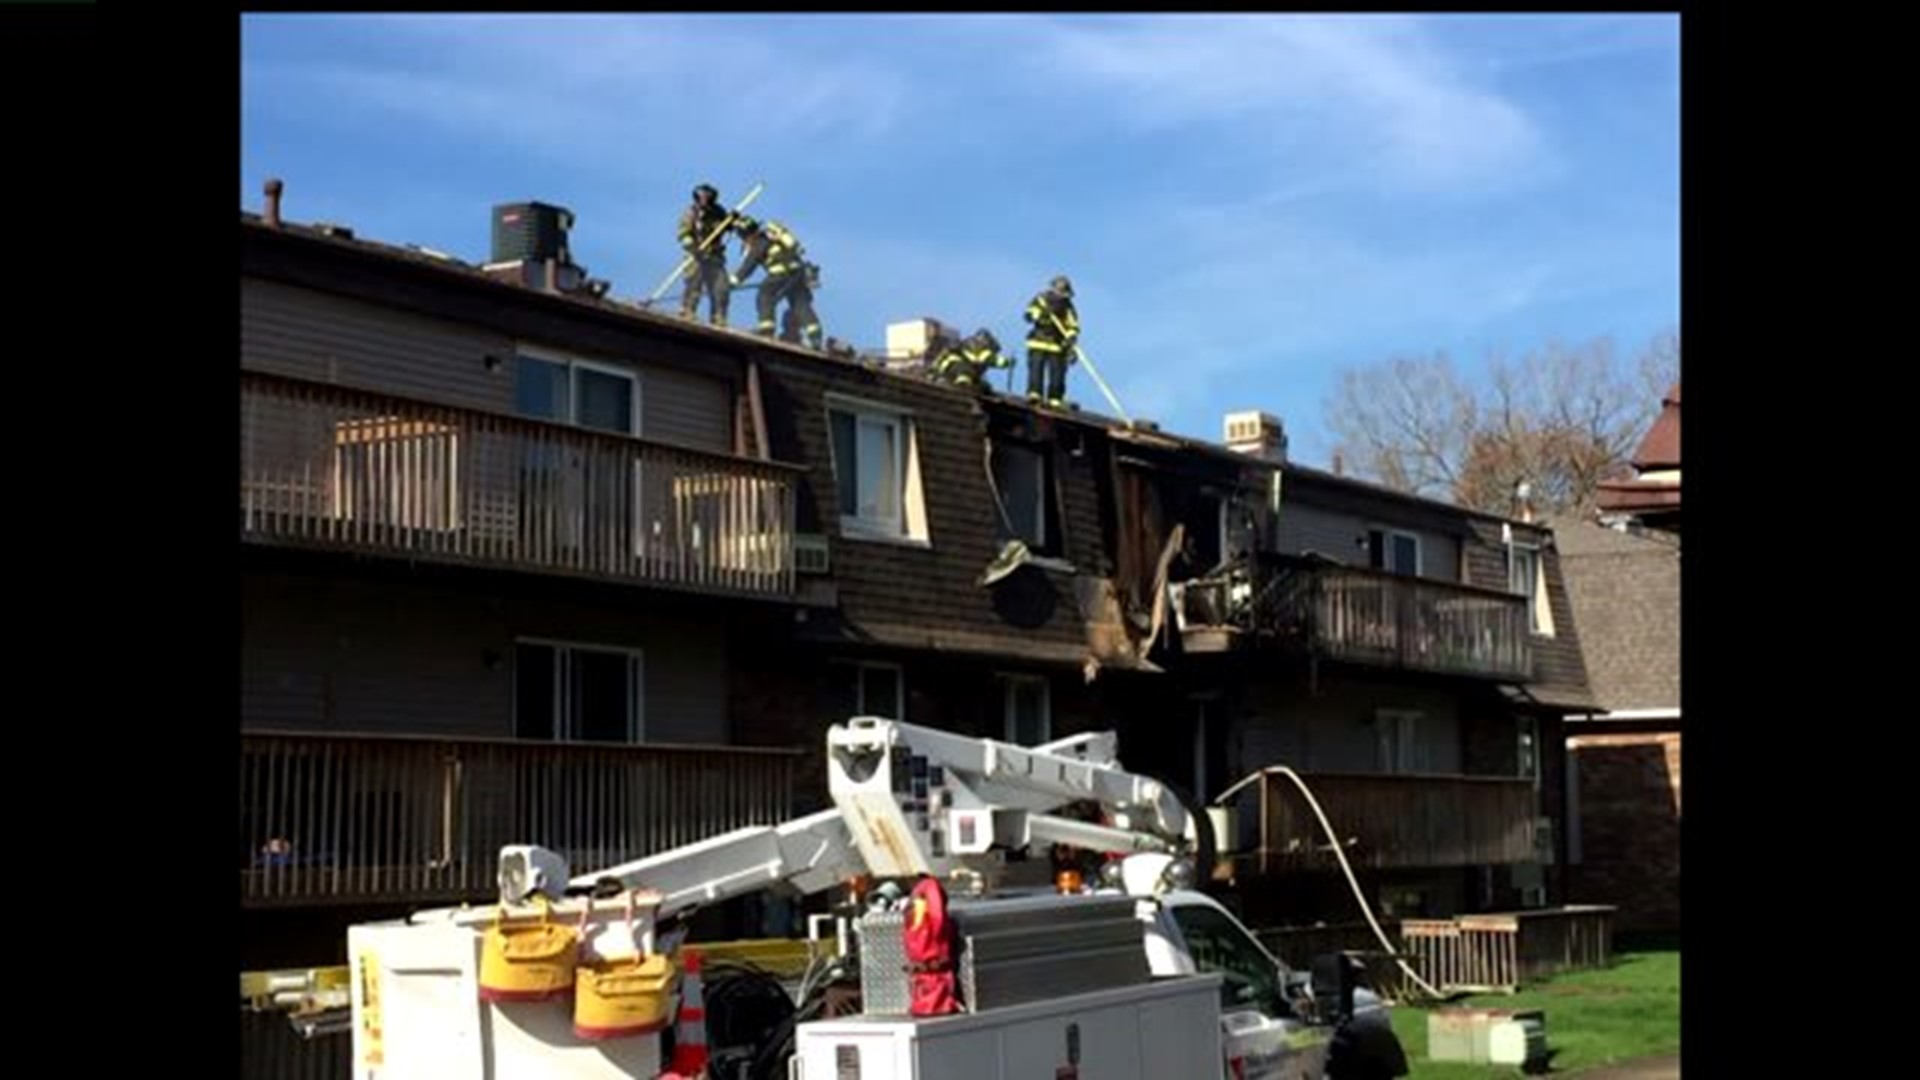 Fire breaks out at aparment in Moline